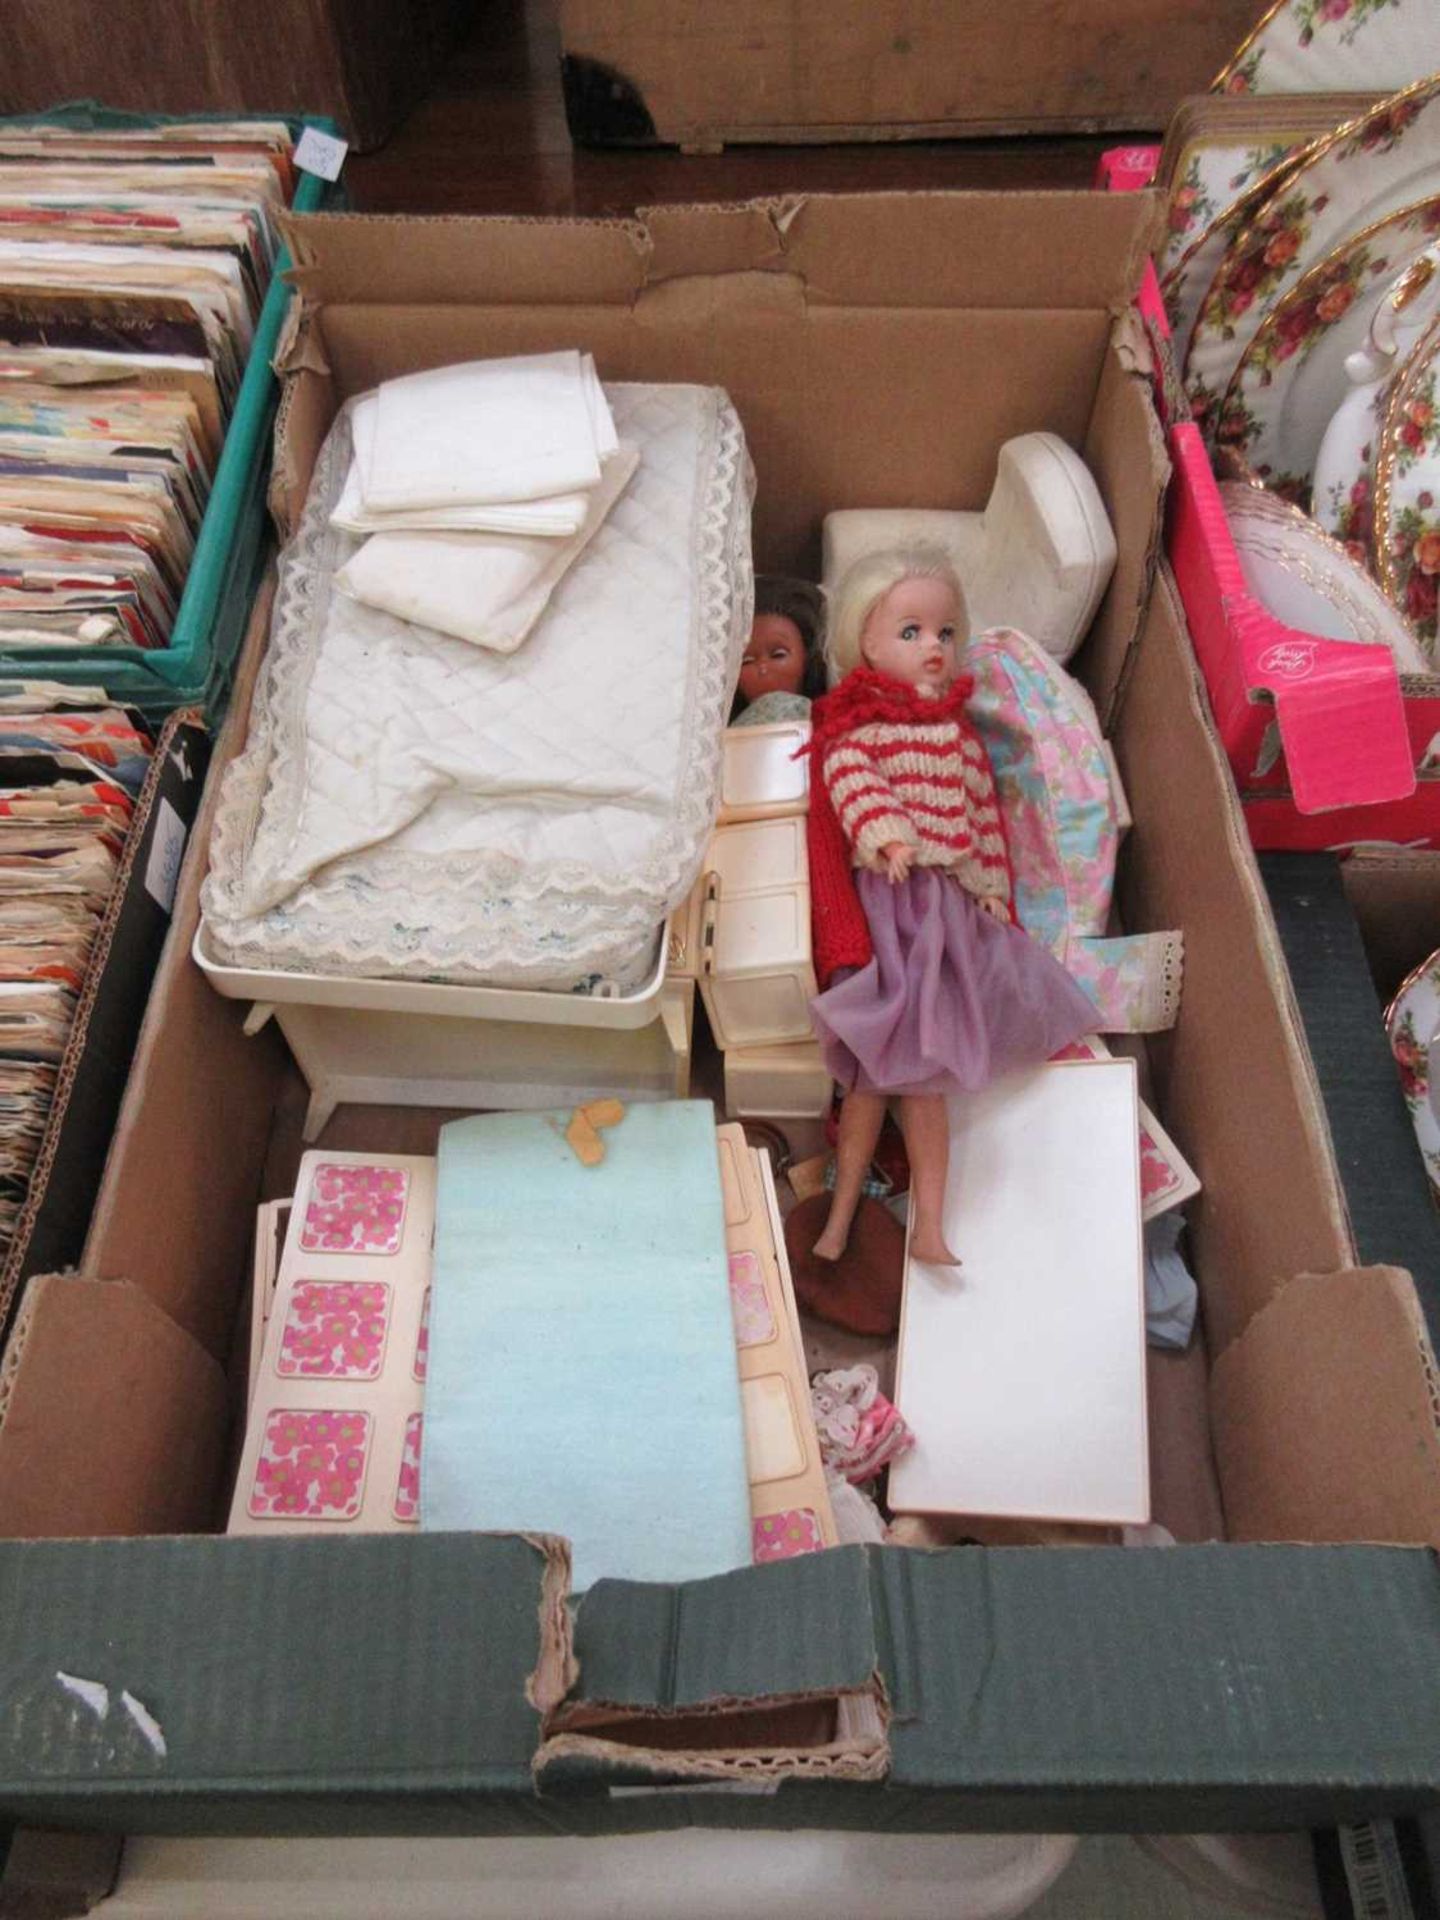 A tray containing a Sindy doll, one other doll, and a selection of furniture